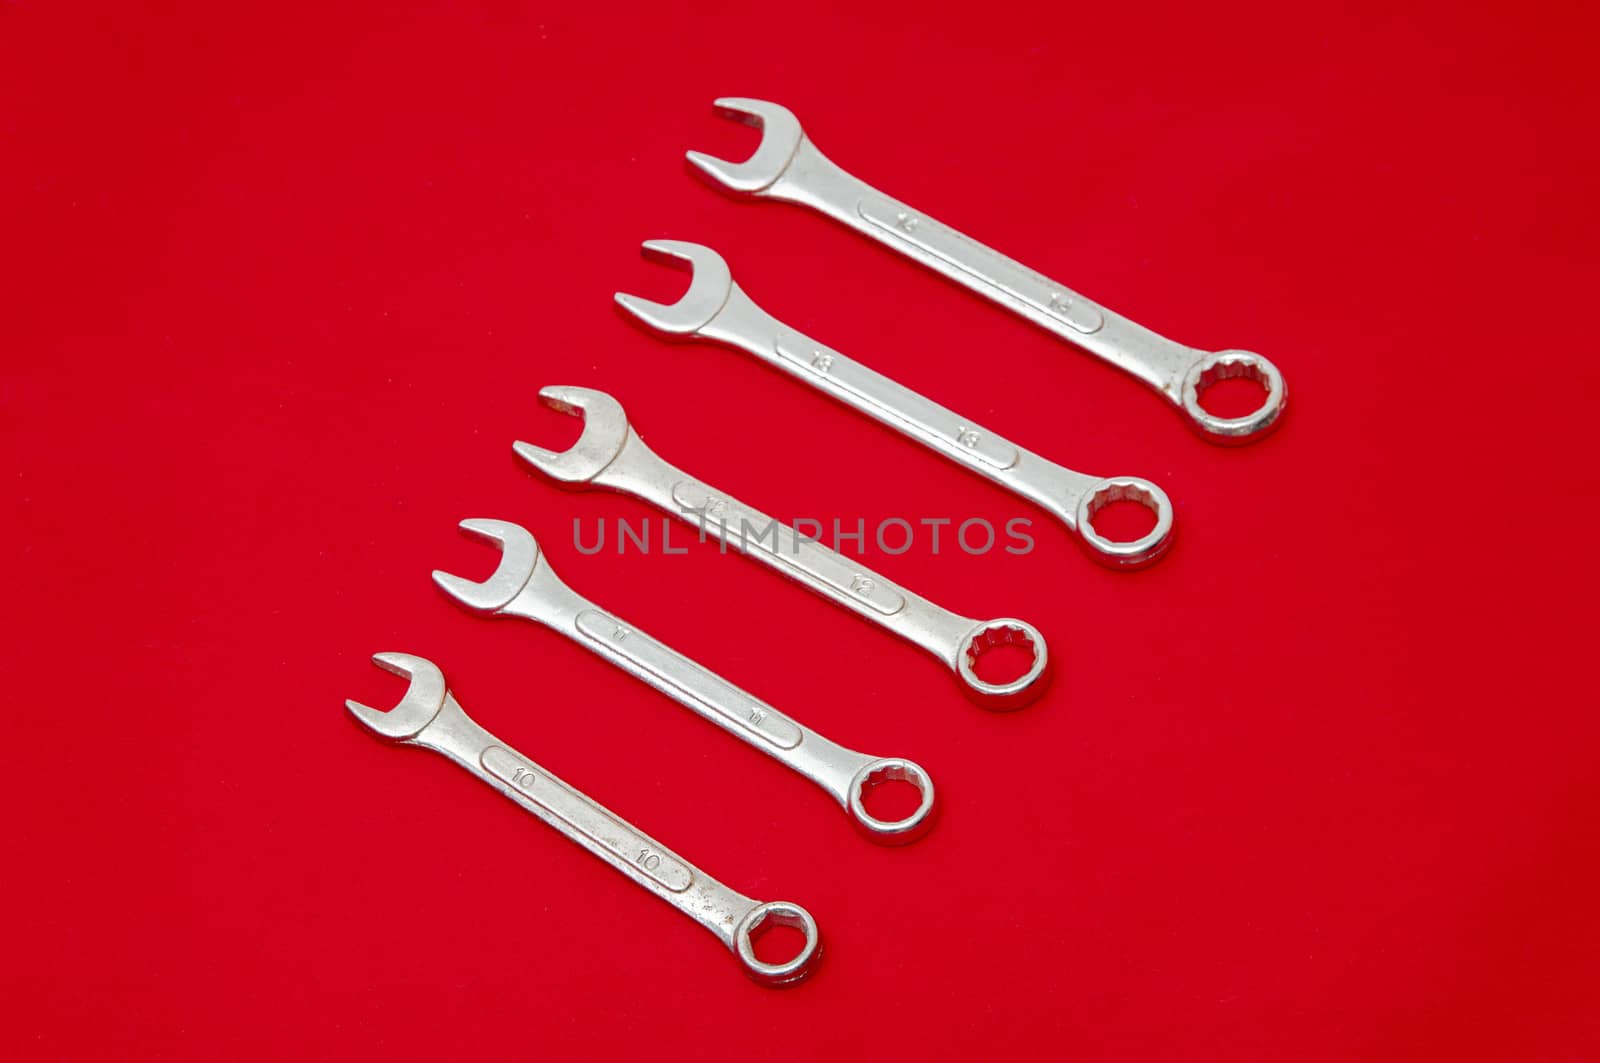 industrial tools on a red background